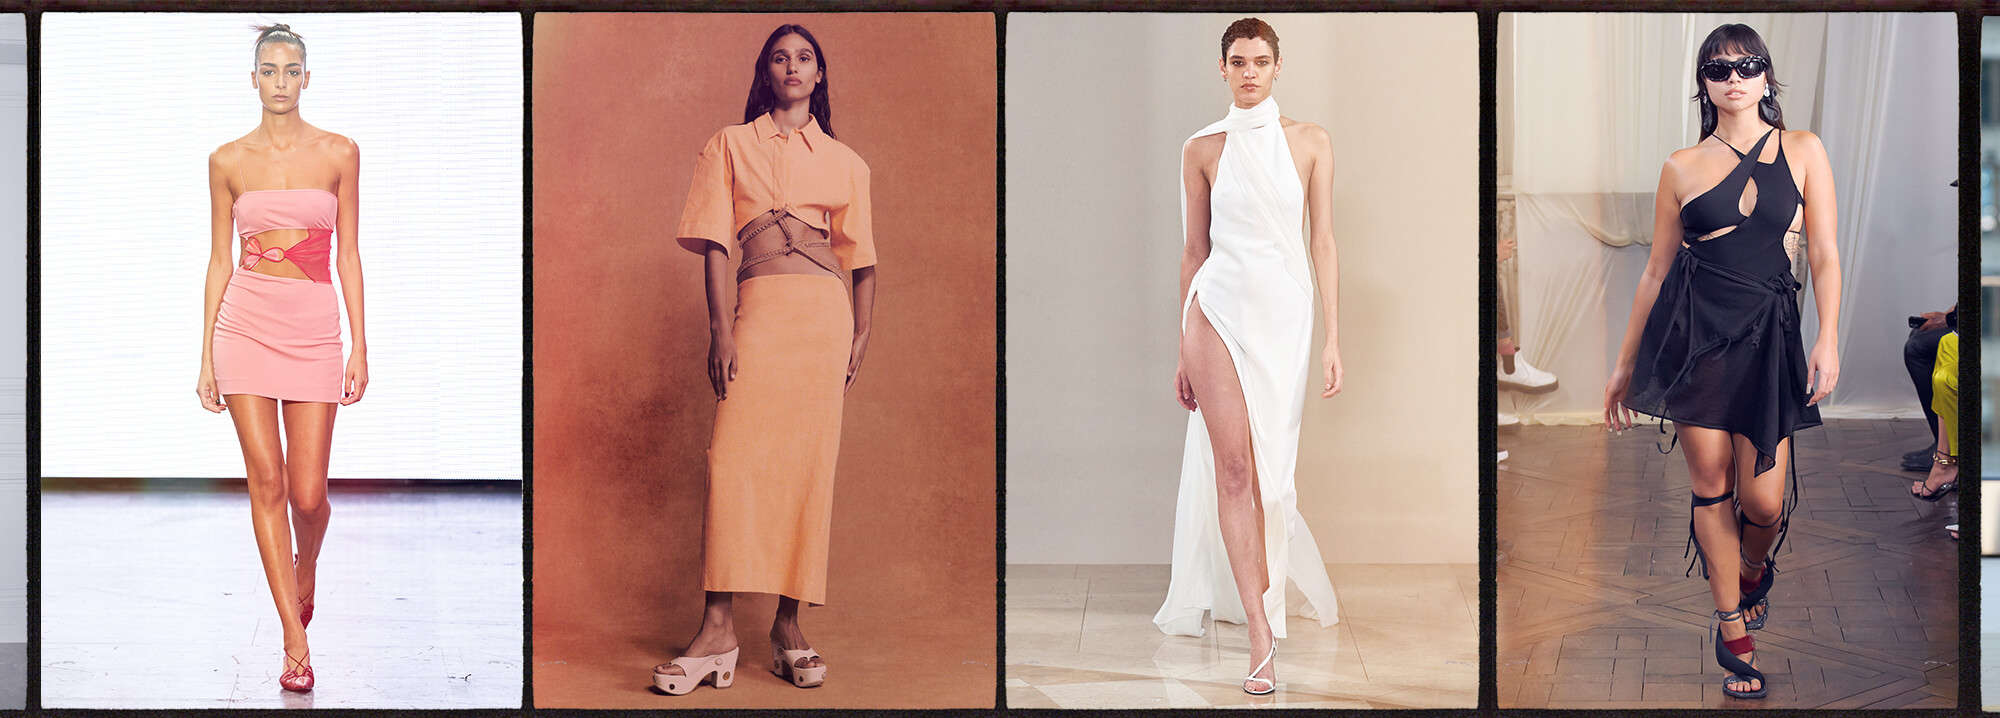 How cut-out dresses became cool again